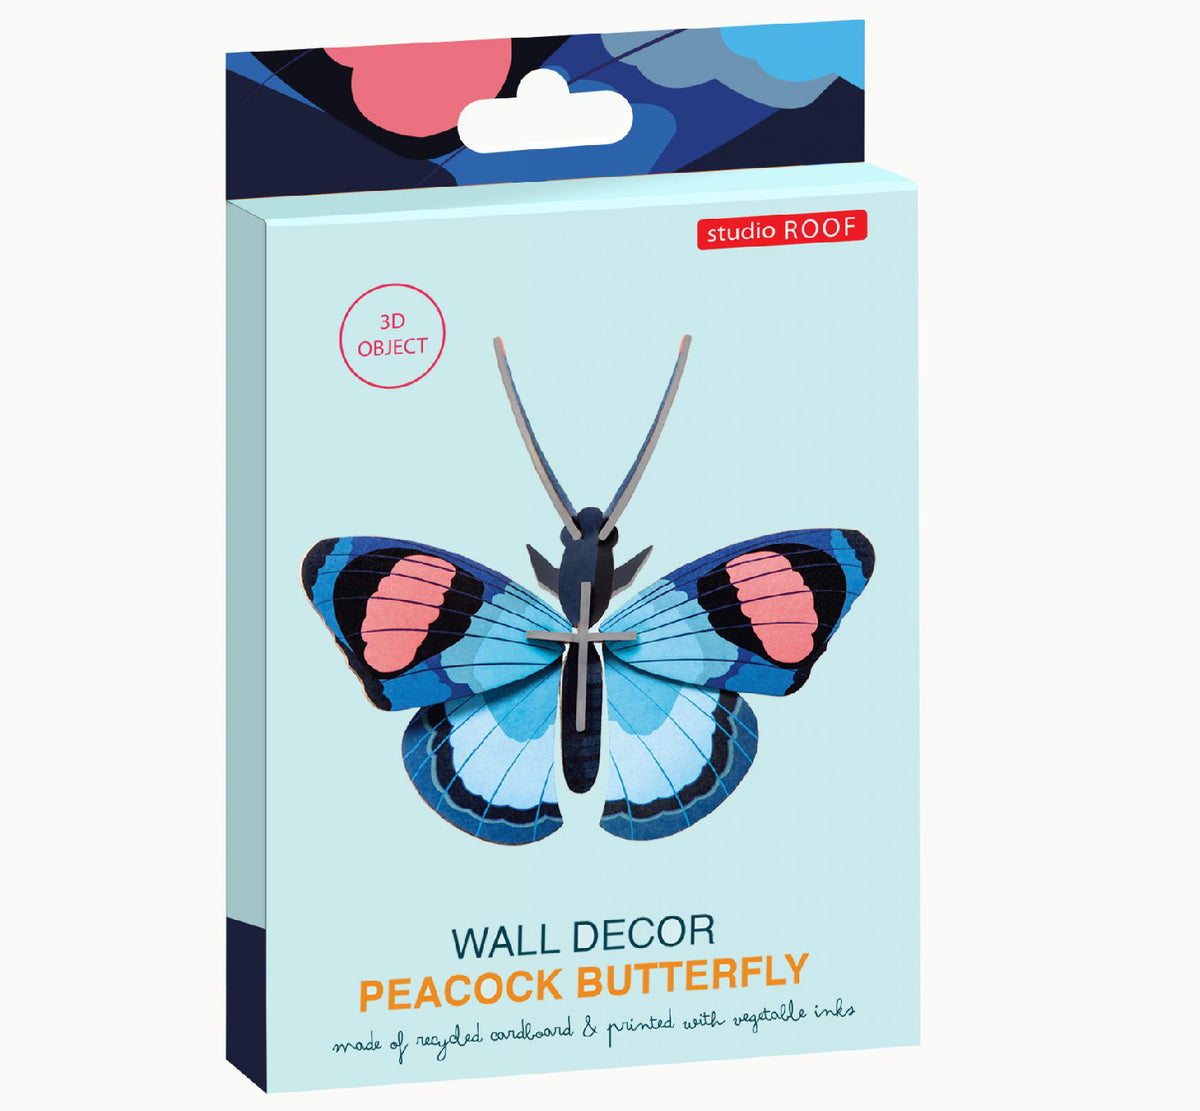 Wanddekoration "Small Insects - Peacock Butterfly"